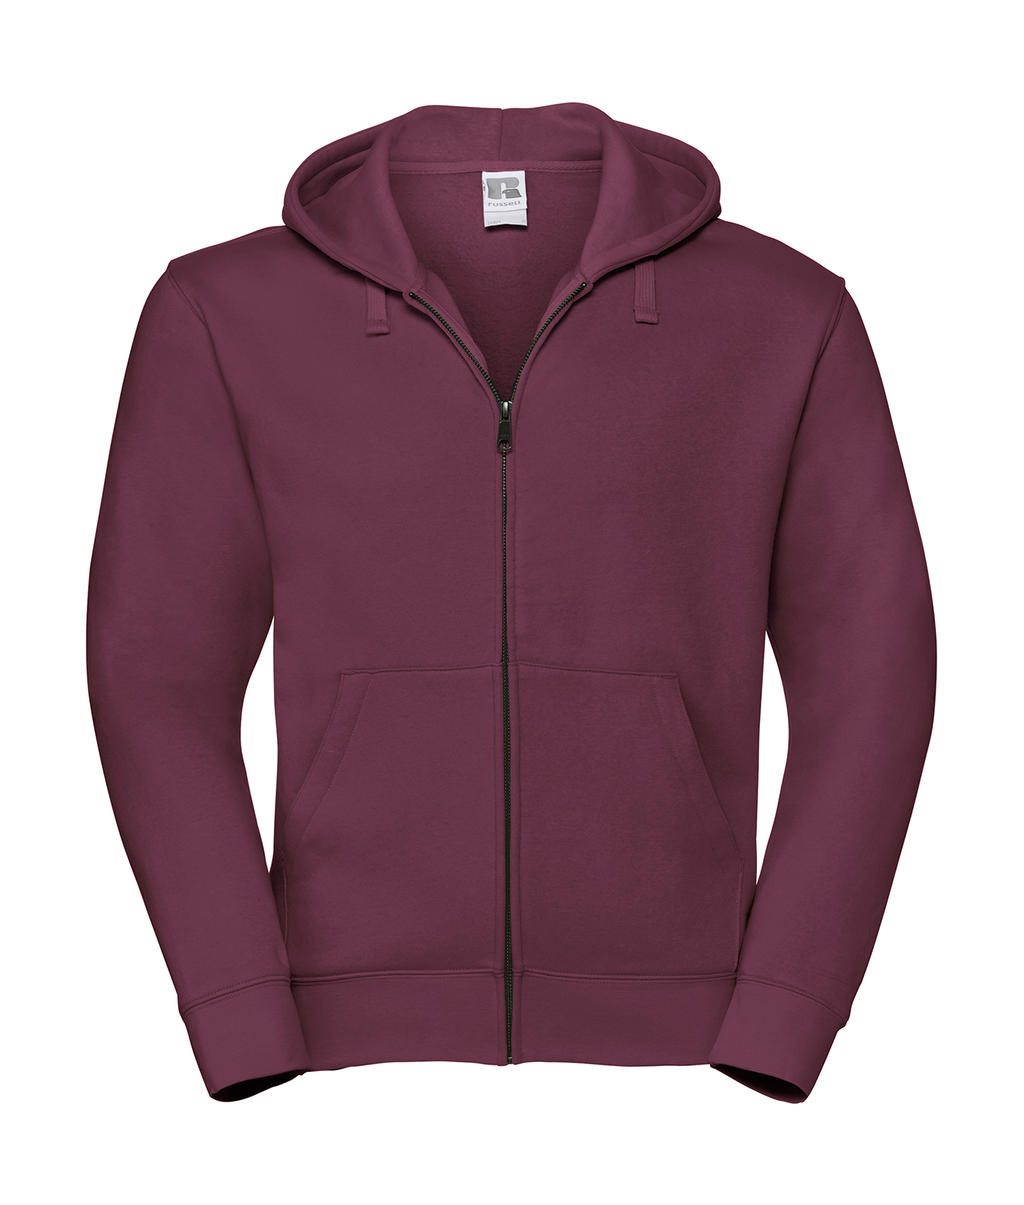  Mens Authentic Zipped Hood in Farbe Burgundy